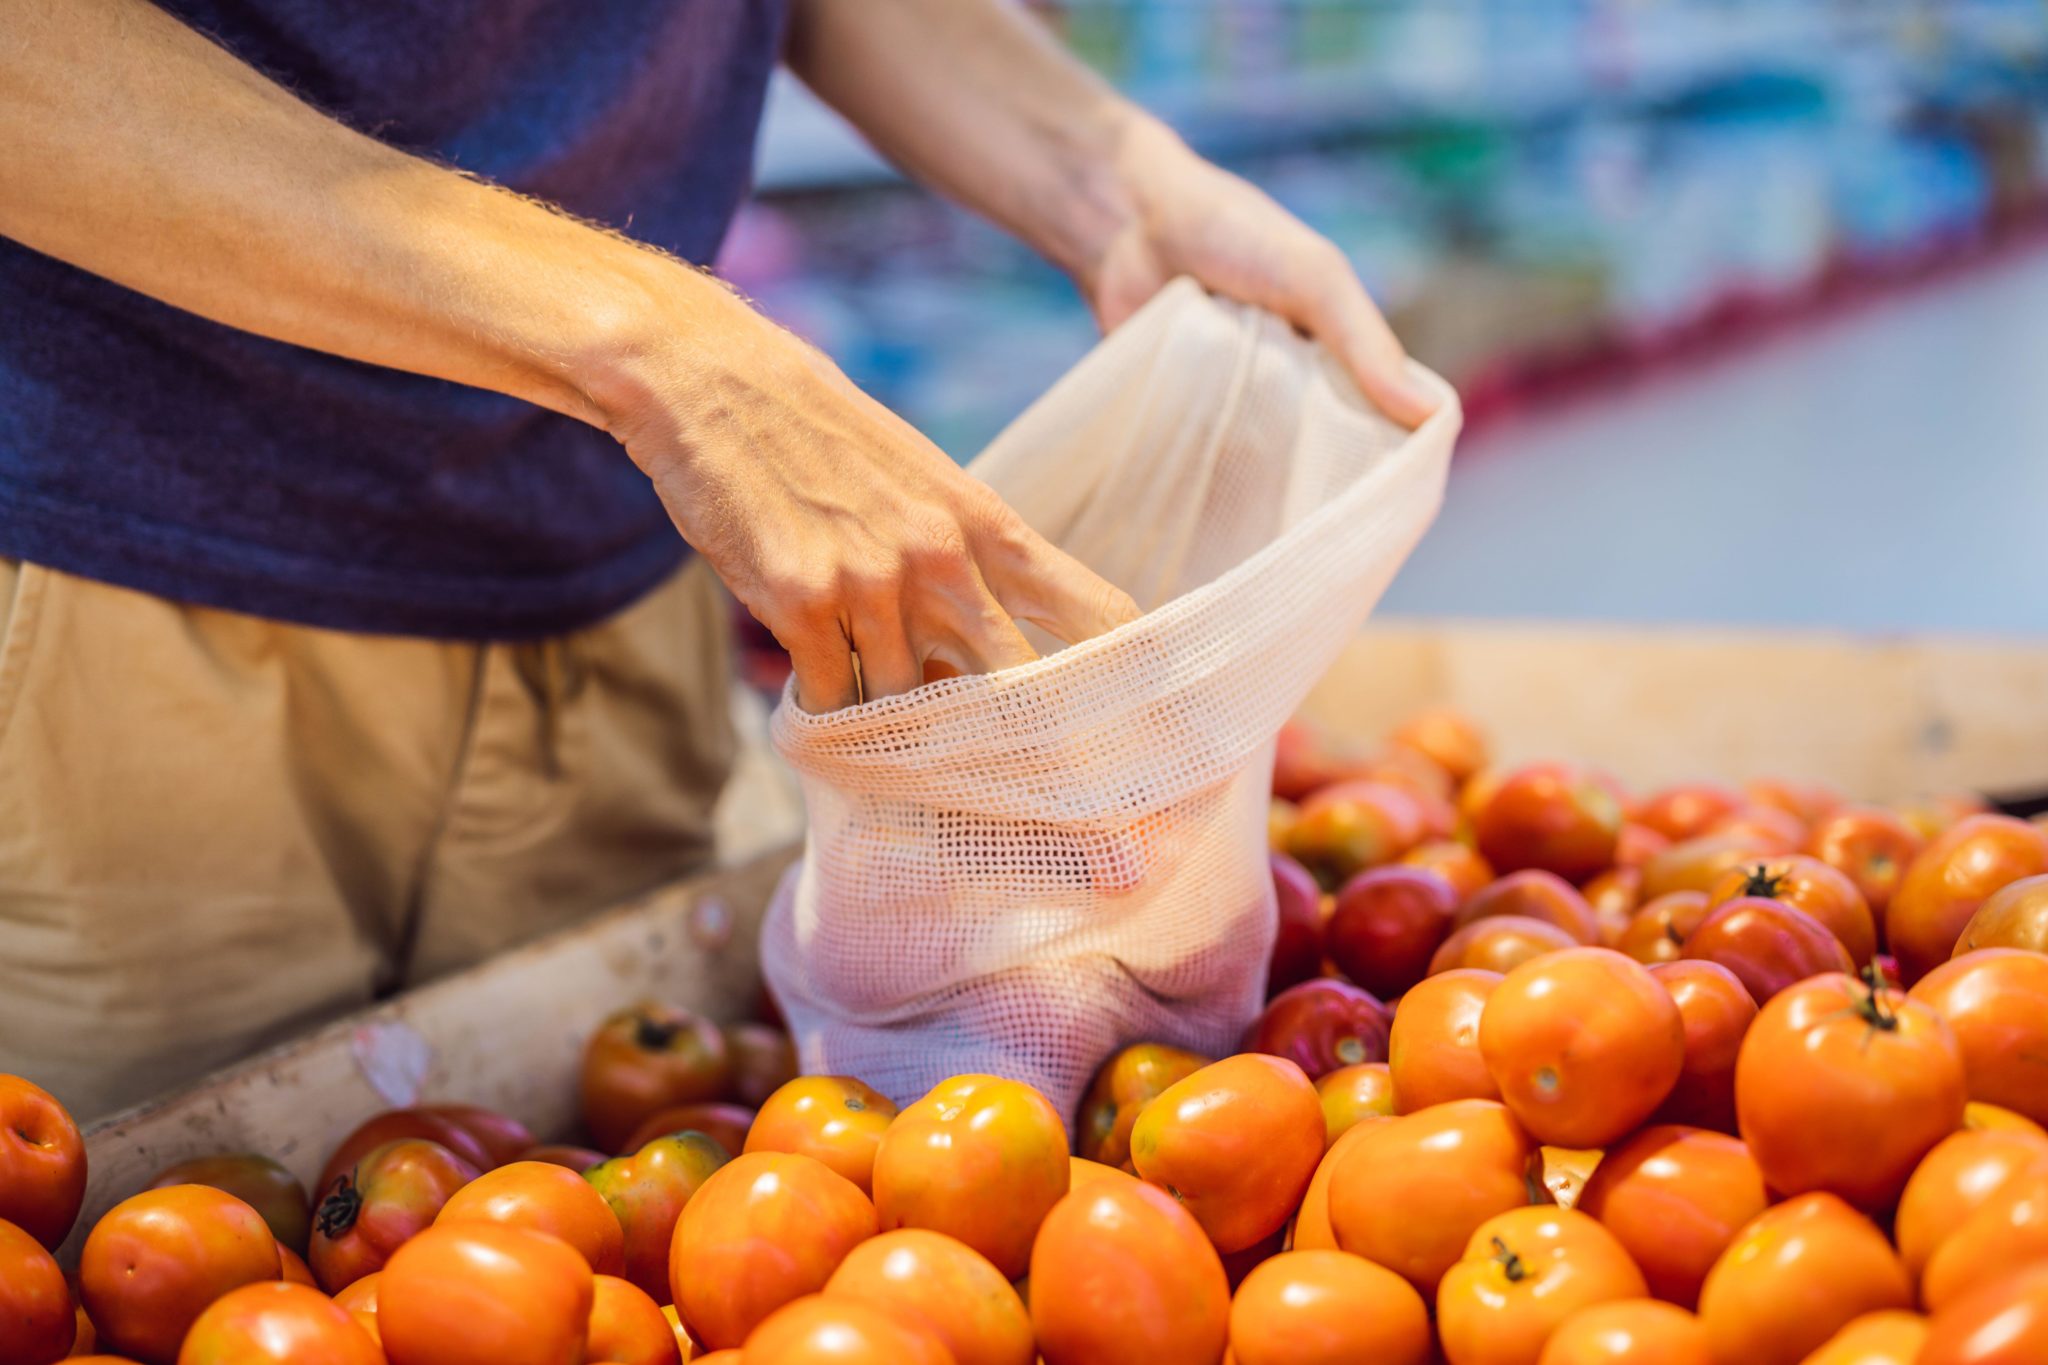 A man chooses tomatoes in a supermarket with a reusable bag in April 2020 in Thailand.